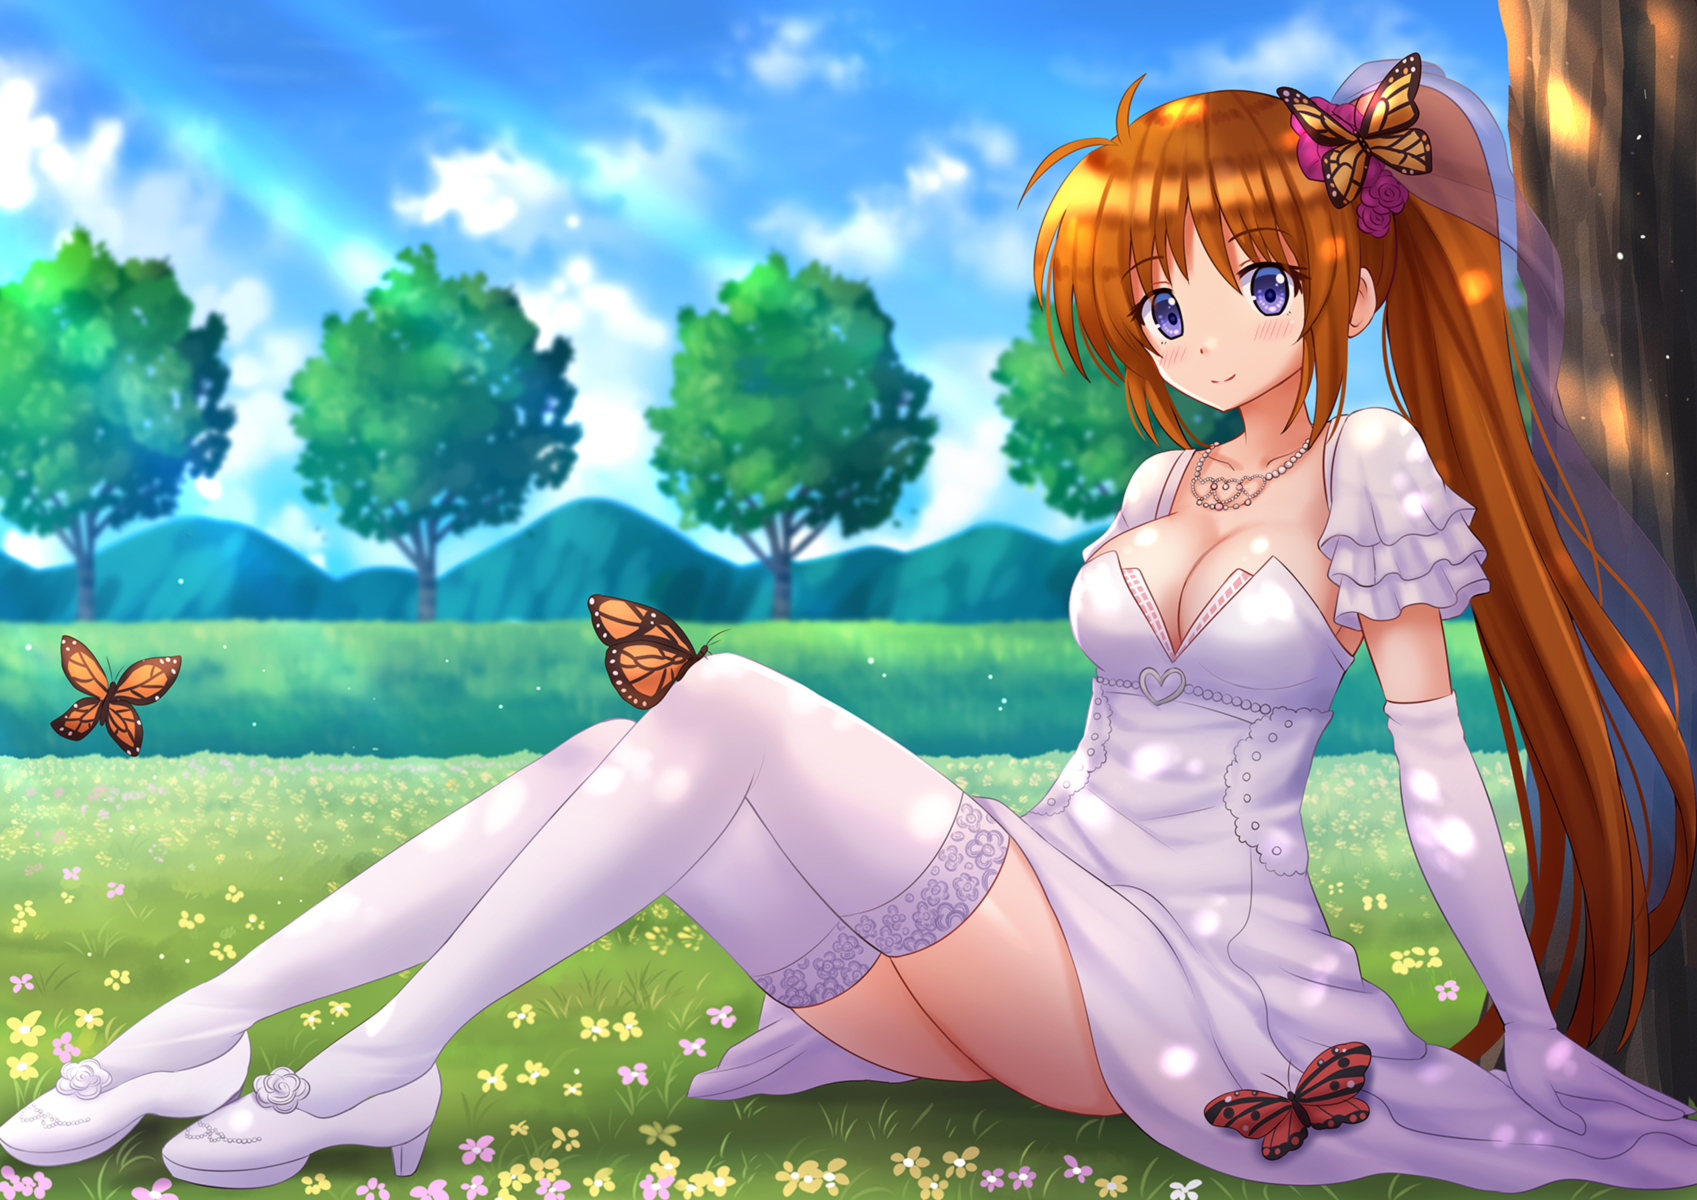 Anime 1697x1200 big boobs anime girls stockings kazenokaze outdoors women outdoors anime looking at viewer butterfly trees sky nature clouds grass on the ground ground white stockings gloves white gloves elbow gloves redhead blue eyes flower in hair cleavage collarbone frills flowers landscape dress long hair Takamachi Nanoha Mahou Shoujo Lyrical Nanoha closed mouth smiling